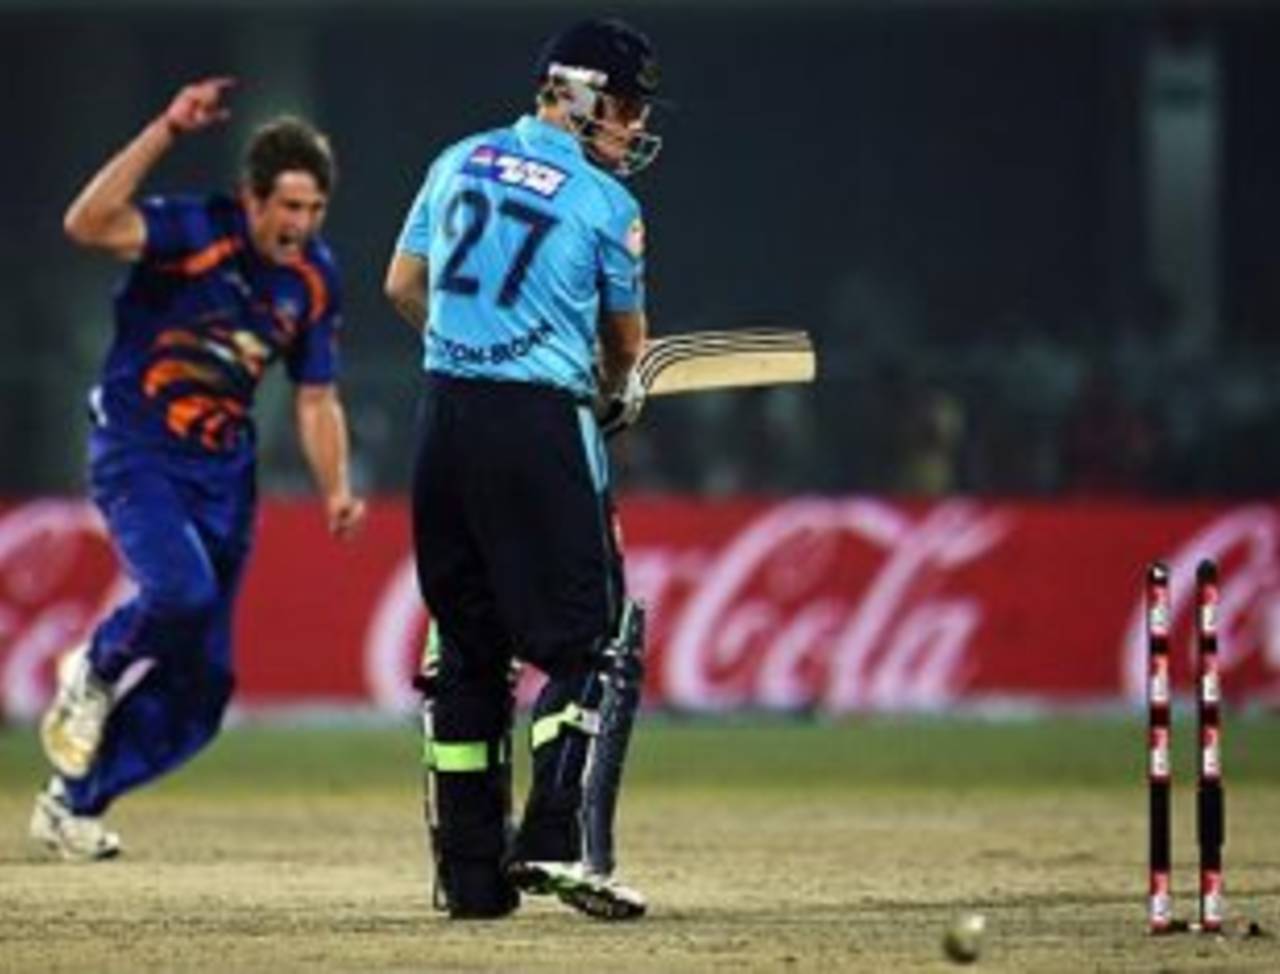 Sussex had participated in the first Champions League&nbsp;&nbsp;&bull;&nbsp;&nbsp;Global Cricket Ventures-BCCI